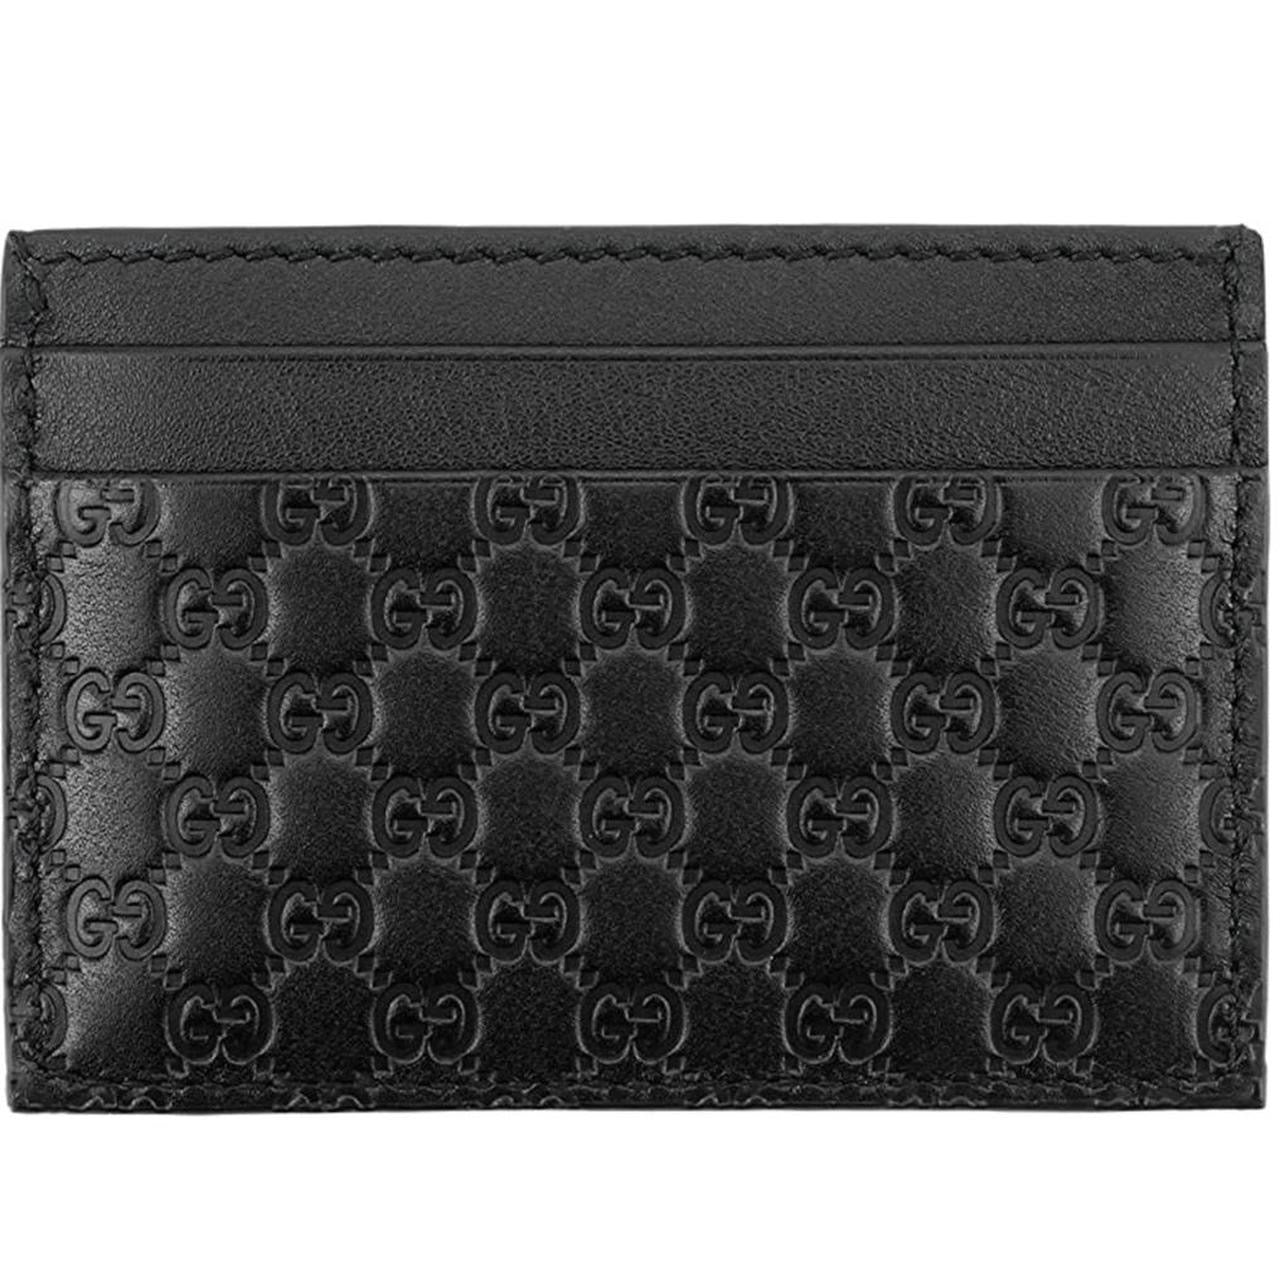 GUCCI GG LEATHER EMBOSSED CARD HOLDER - BLACK